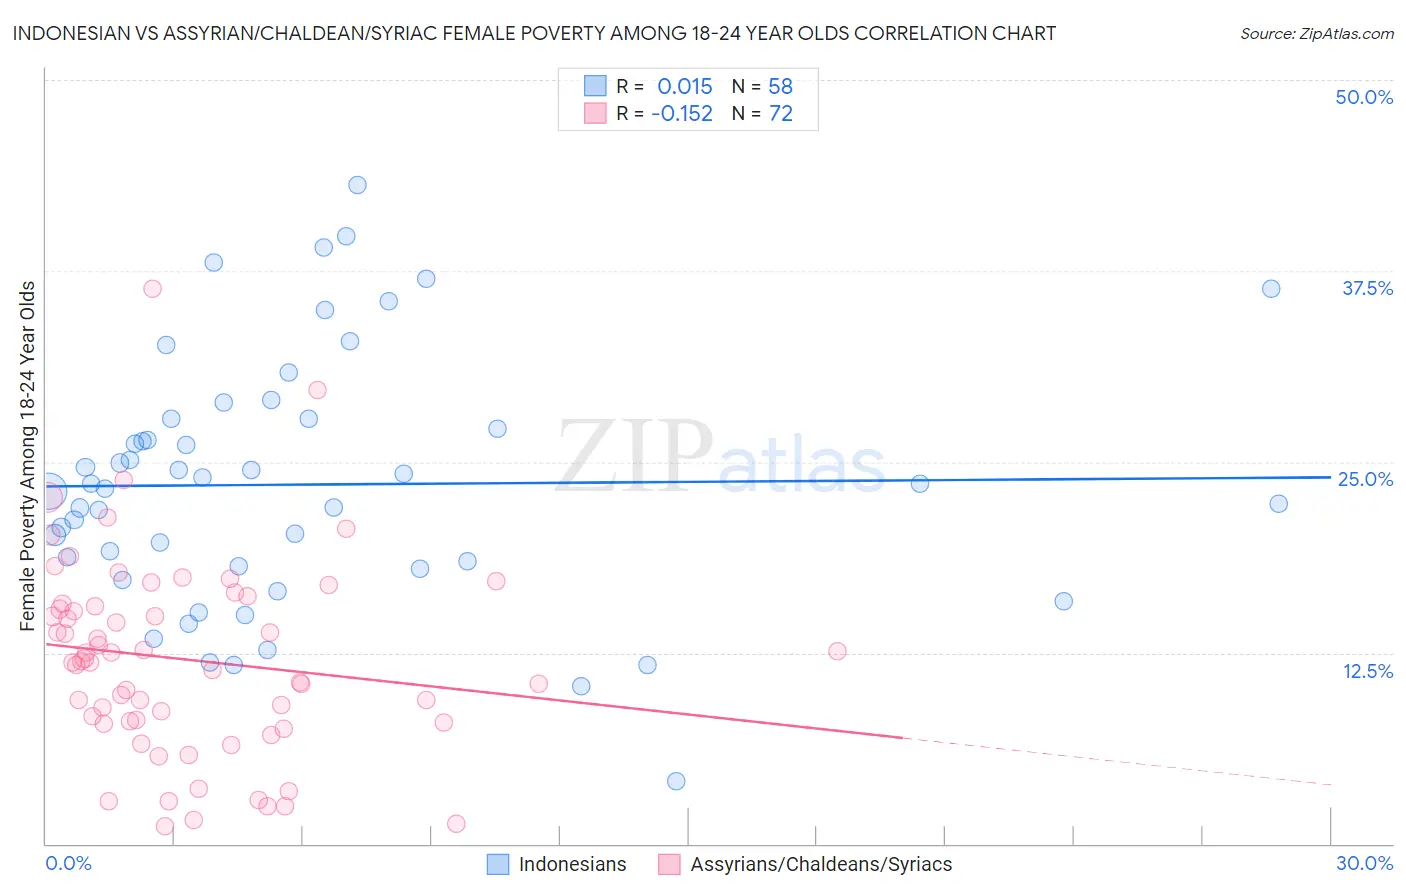 Indonesian vs Assyrian/Chaldean/Syriac Female Poverty Among 18-24 Year Olds